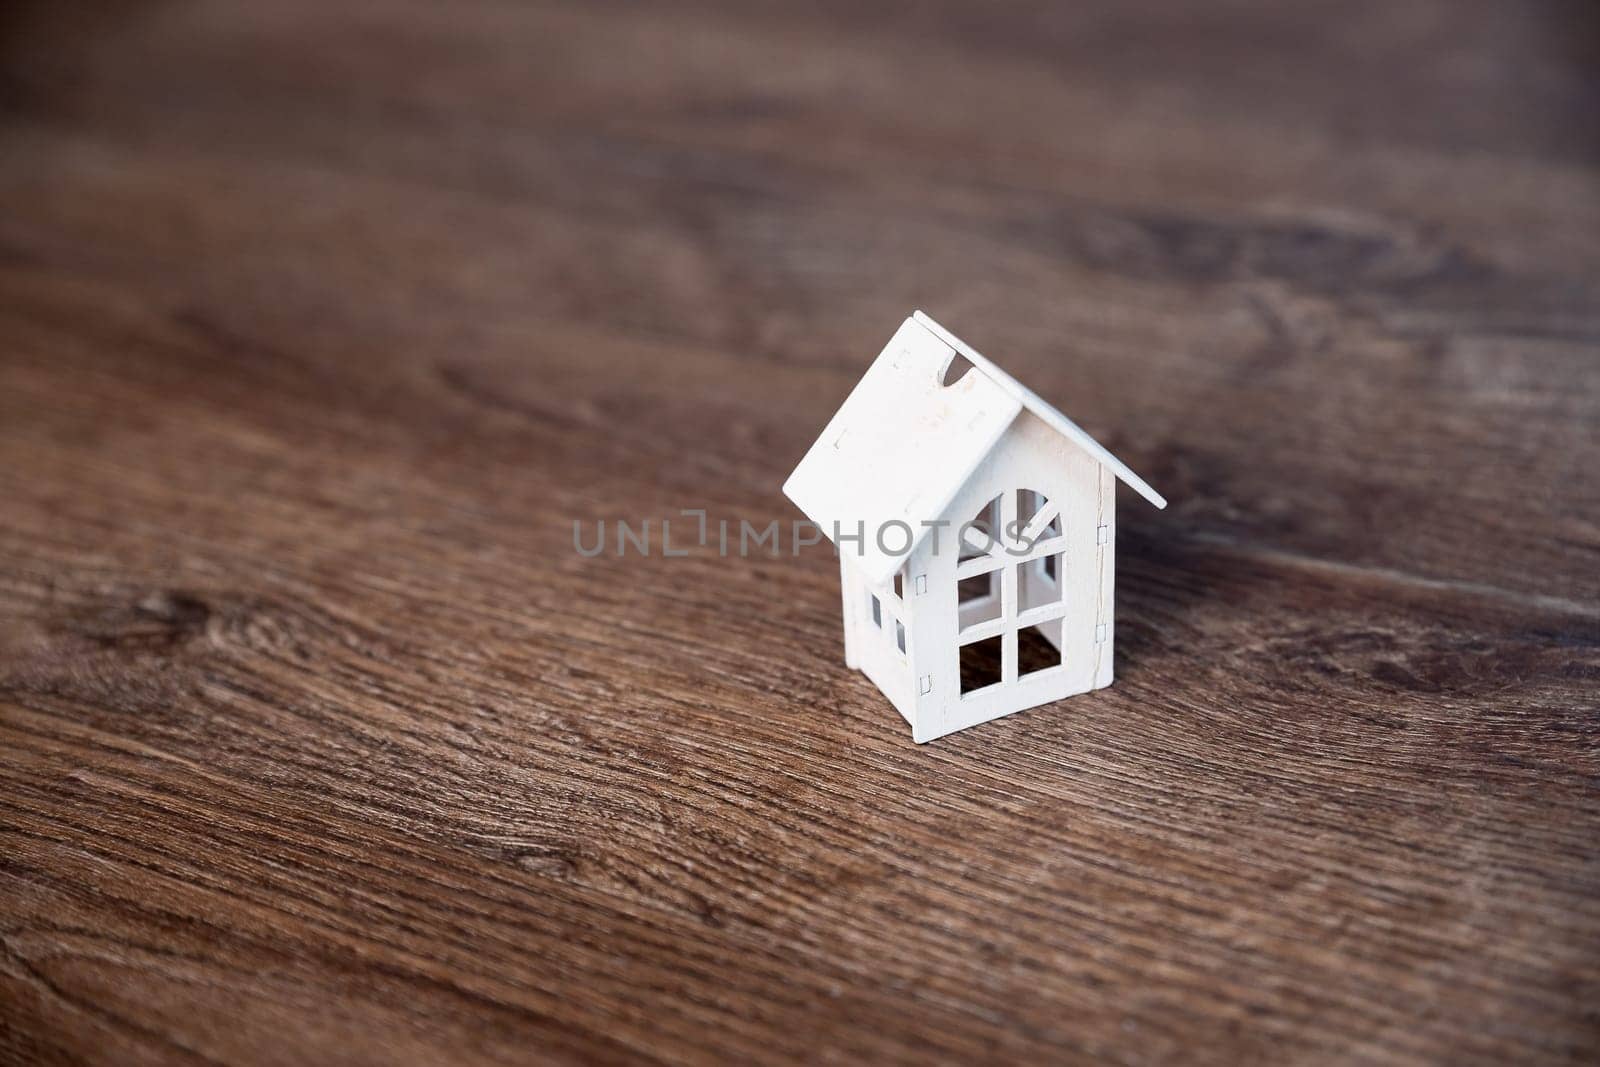 Model house isolated on wooden background. investment insurance concept.Real Estate Concept.Wooden house.white toy house - home purchase mortgage concept.Copy space by YuliaYaspe1979